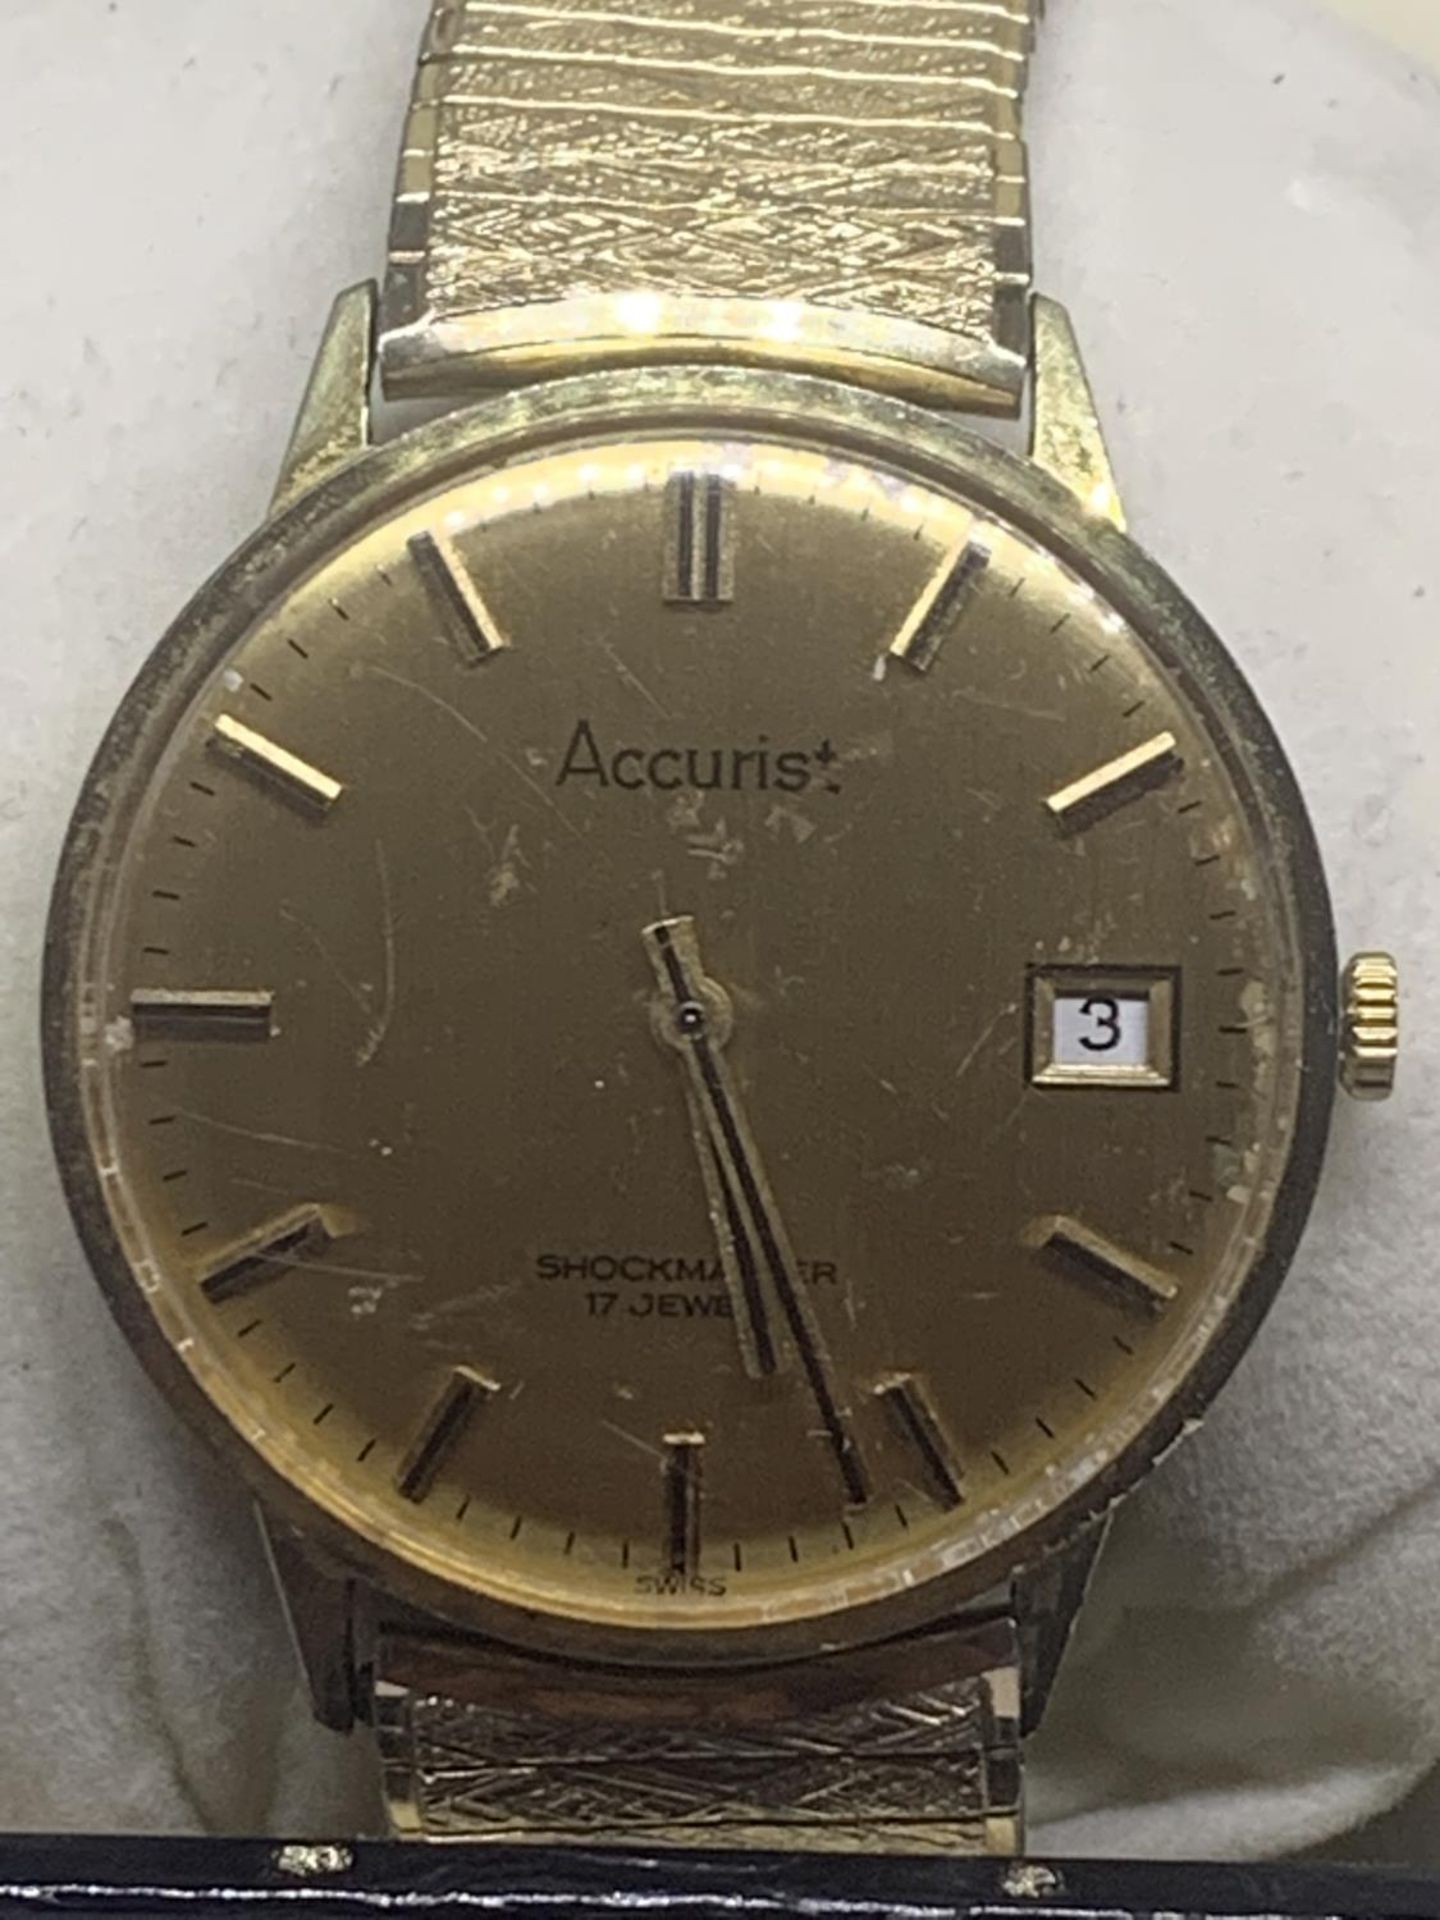 A VINTAGE ACCURIST WRIST WATCH IN A PRESENTATION BOX - Image 3 of 3